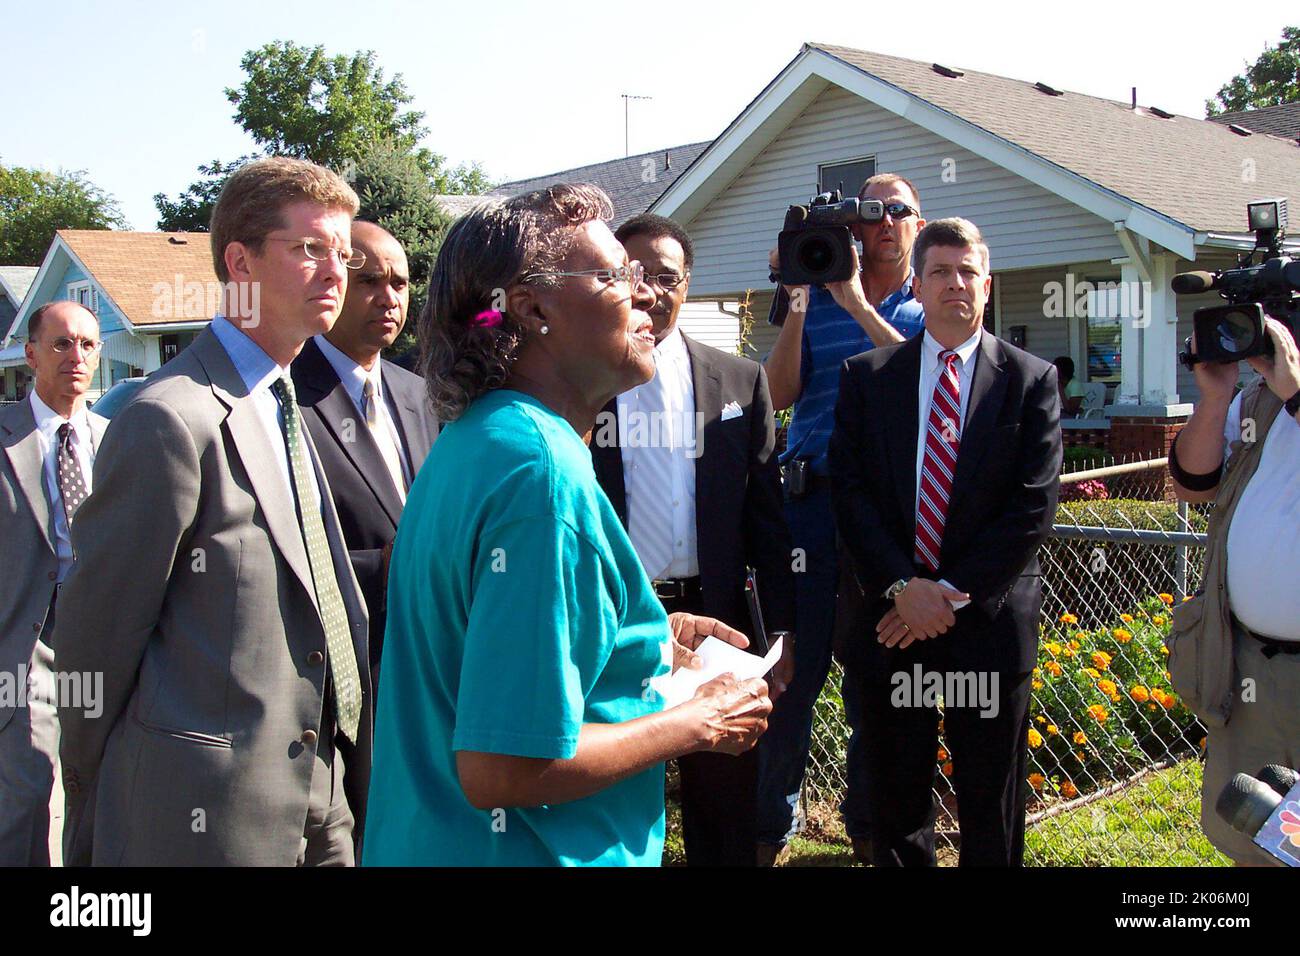 Secretary Shaun Donovan on Green Impact Zone tour in Kansas City, Missouri. Secretary Donovan was accompanied on the tour of the urban-core neighborhood, targeted for energy-efficient development under the American Recovery and Reinvestment Act of 2009, by Missouri Congressman Emmanuel Cleaver, White House Urban Affairs Director Adolfo Carrion, Jr., Department of Transportation Deputy Secretary John Porcari, and Ivanhoe Neighborhood Council Director Margaret May.. Stock Photo